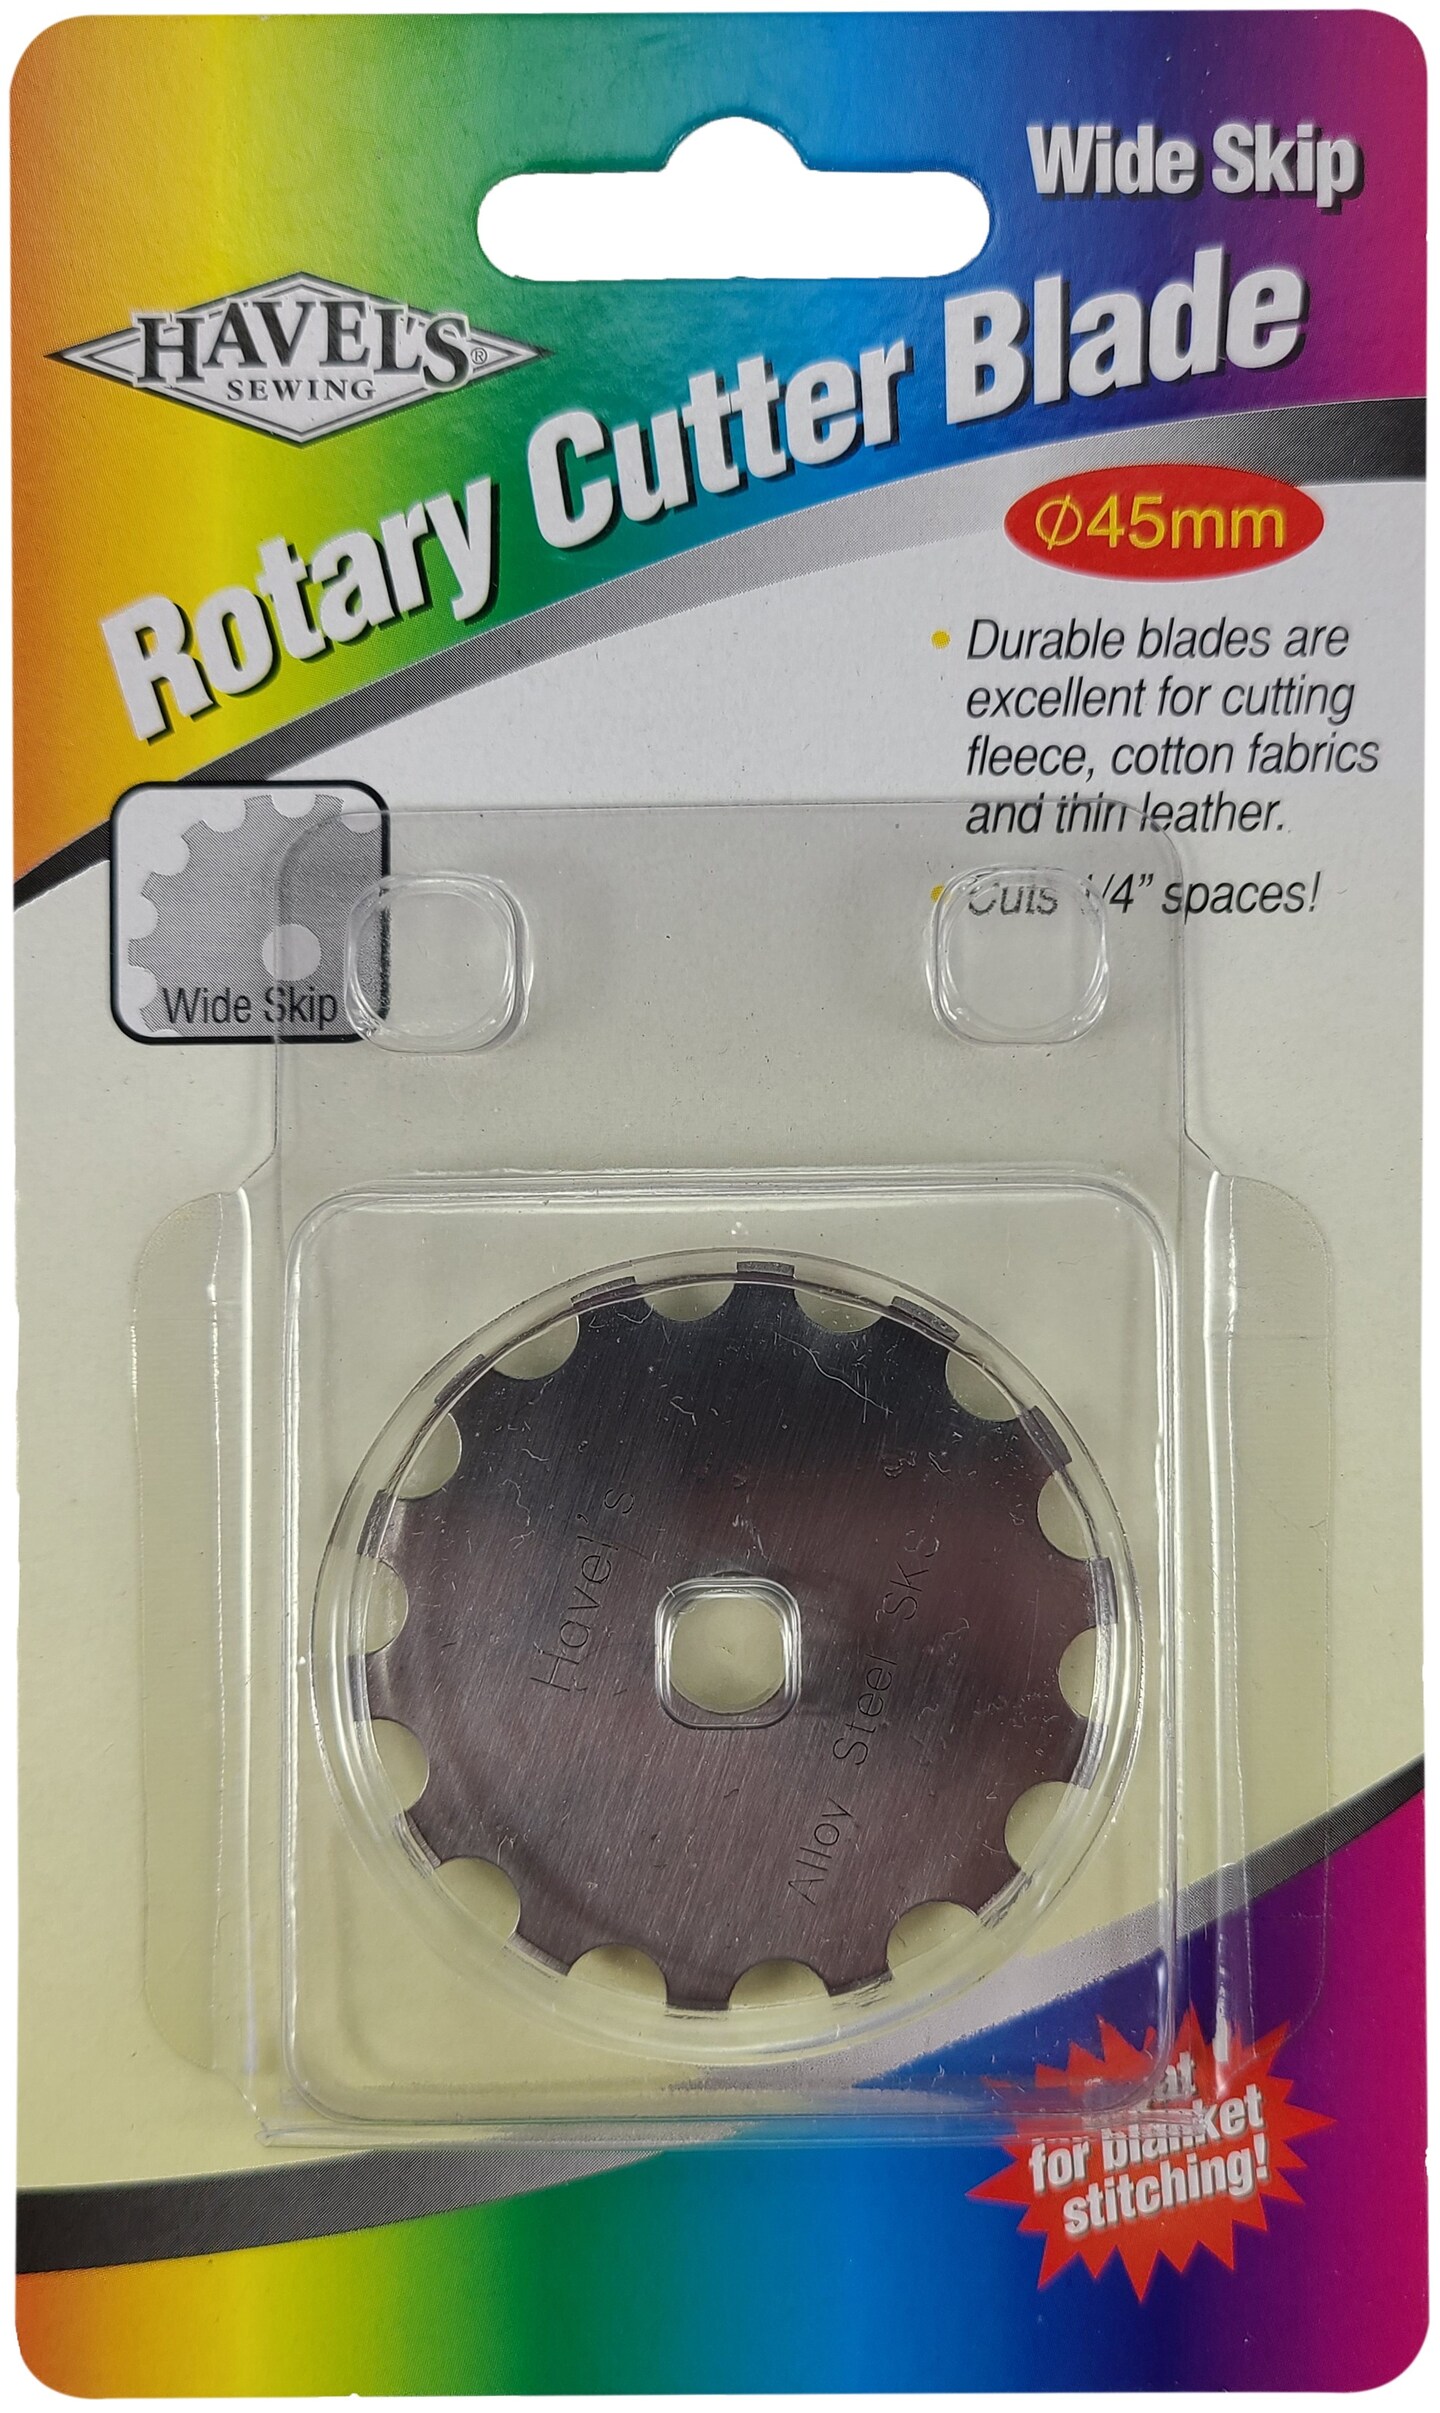 45mm Rotary Cutter Blade Refill - 5 ct. – Wooden SpoolsQuilting,  Knitting and More!